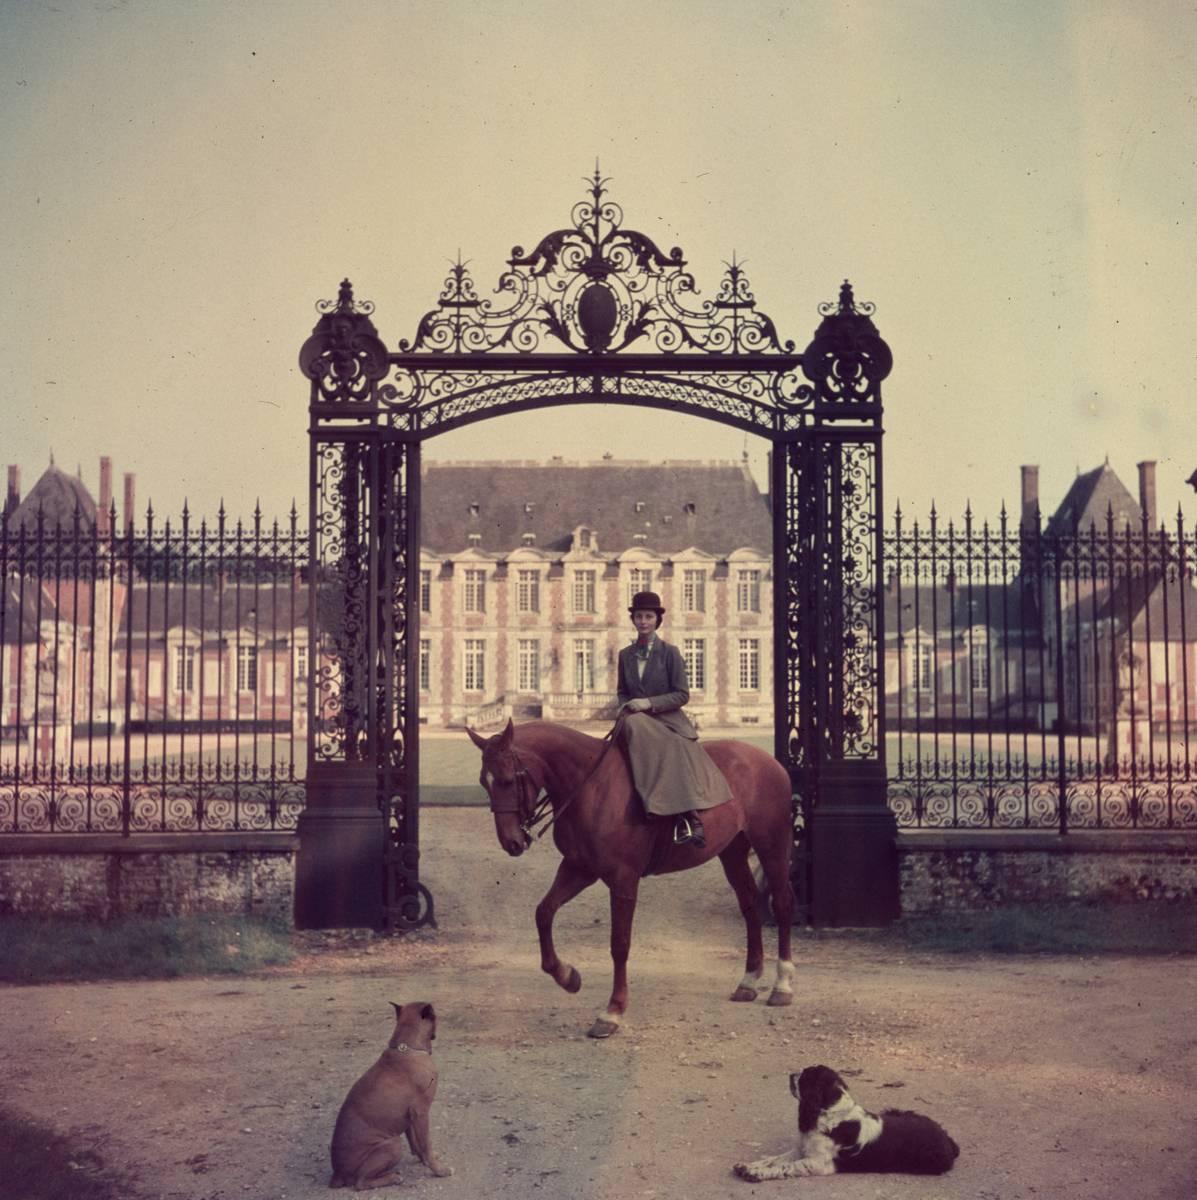 Slim Aarons Figurative Photograph - 'Equestrian Entrance' Normandy (Estate Stamped Edition)